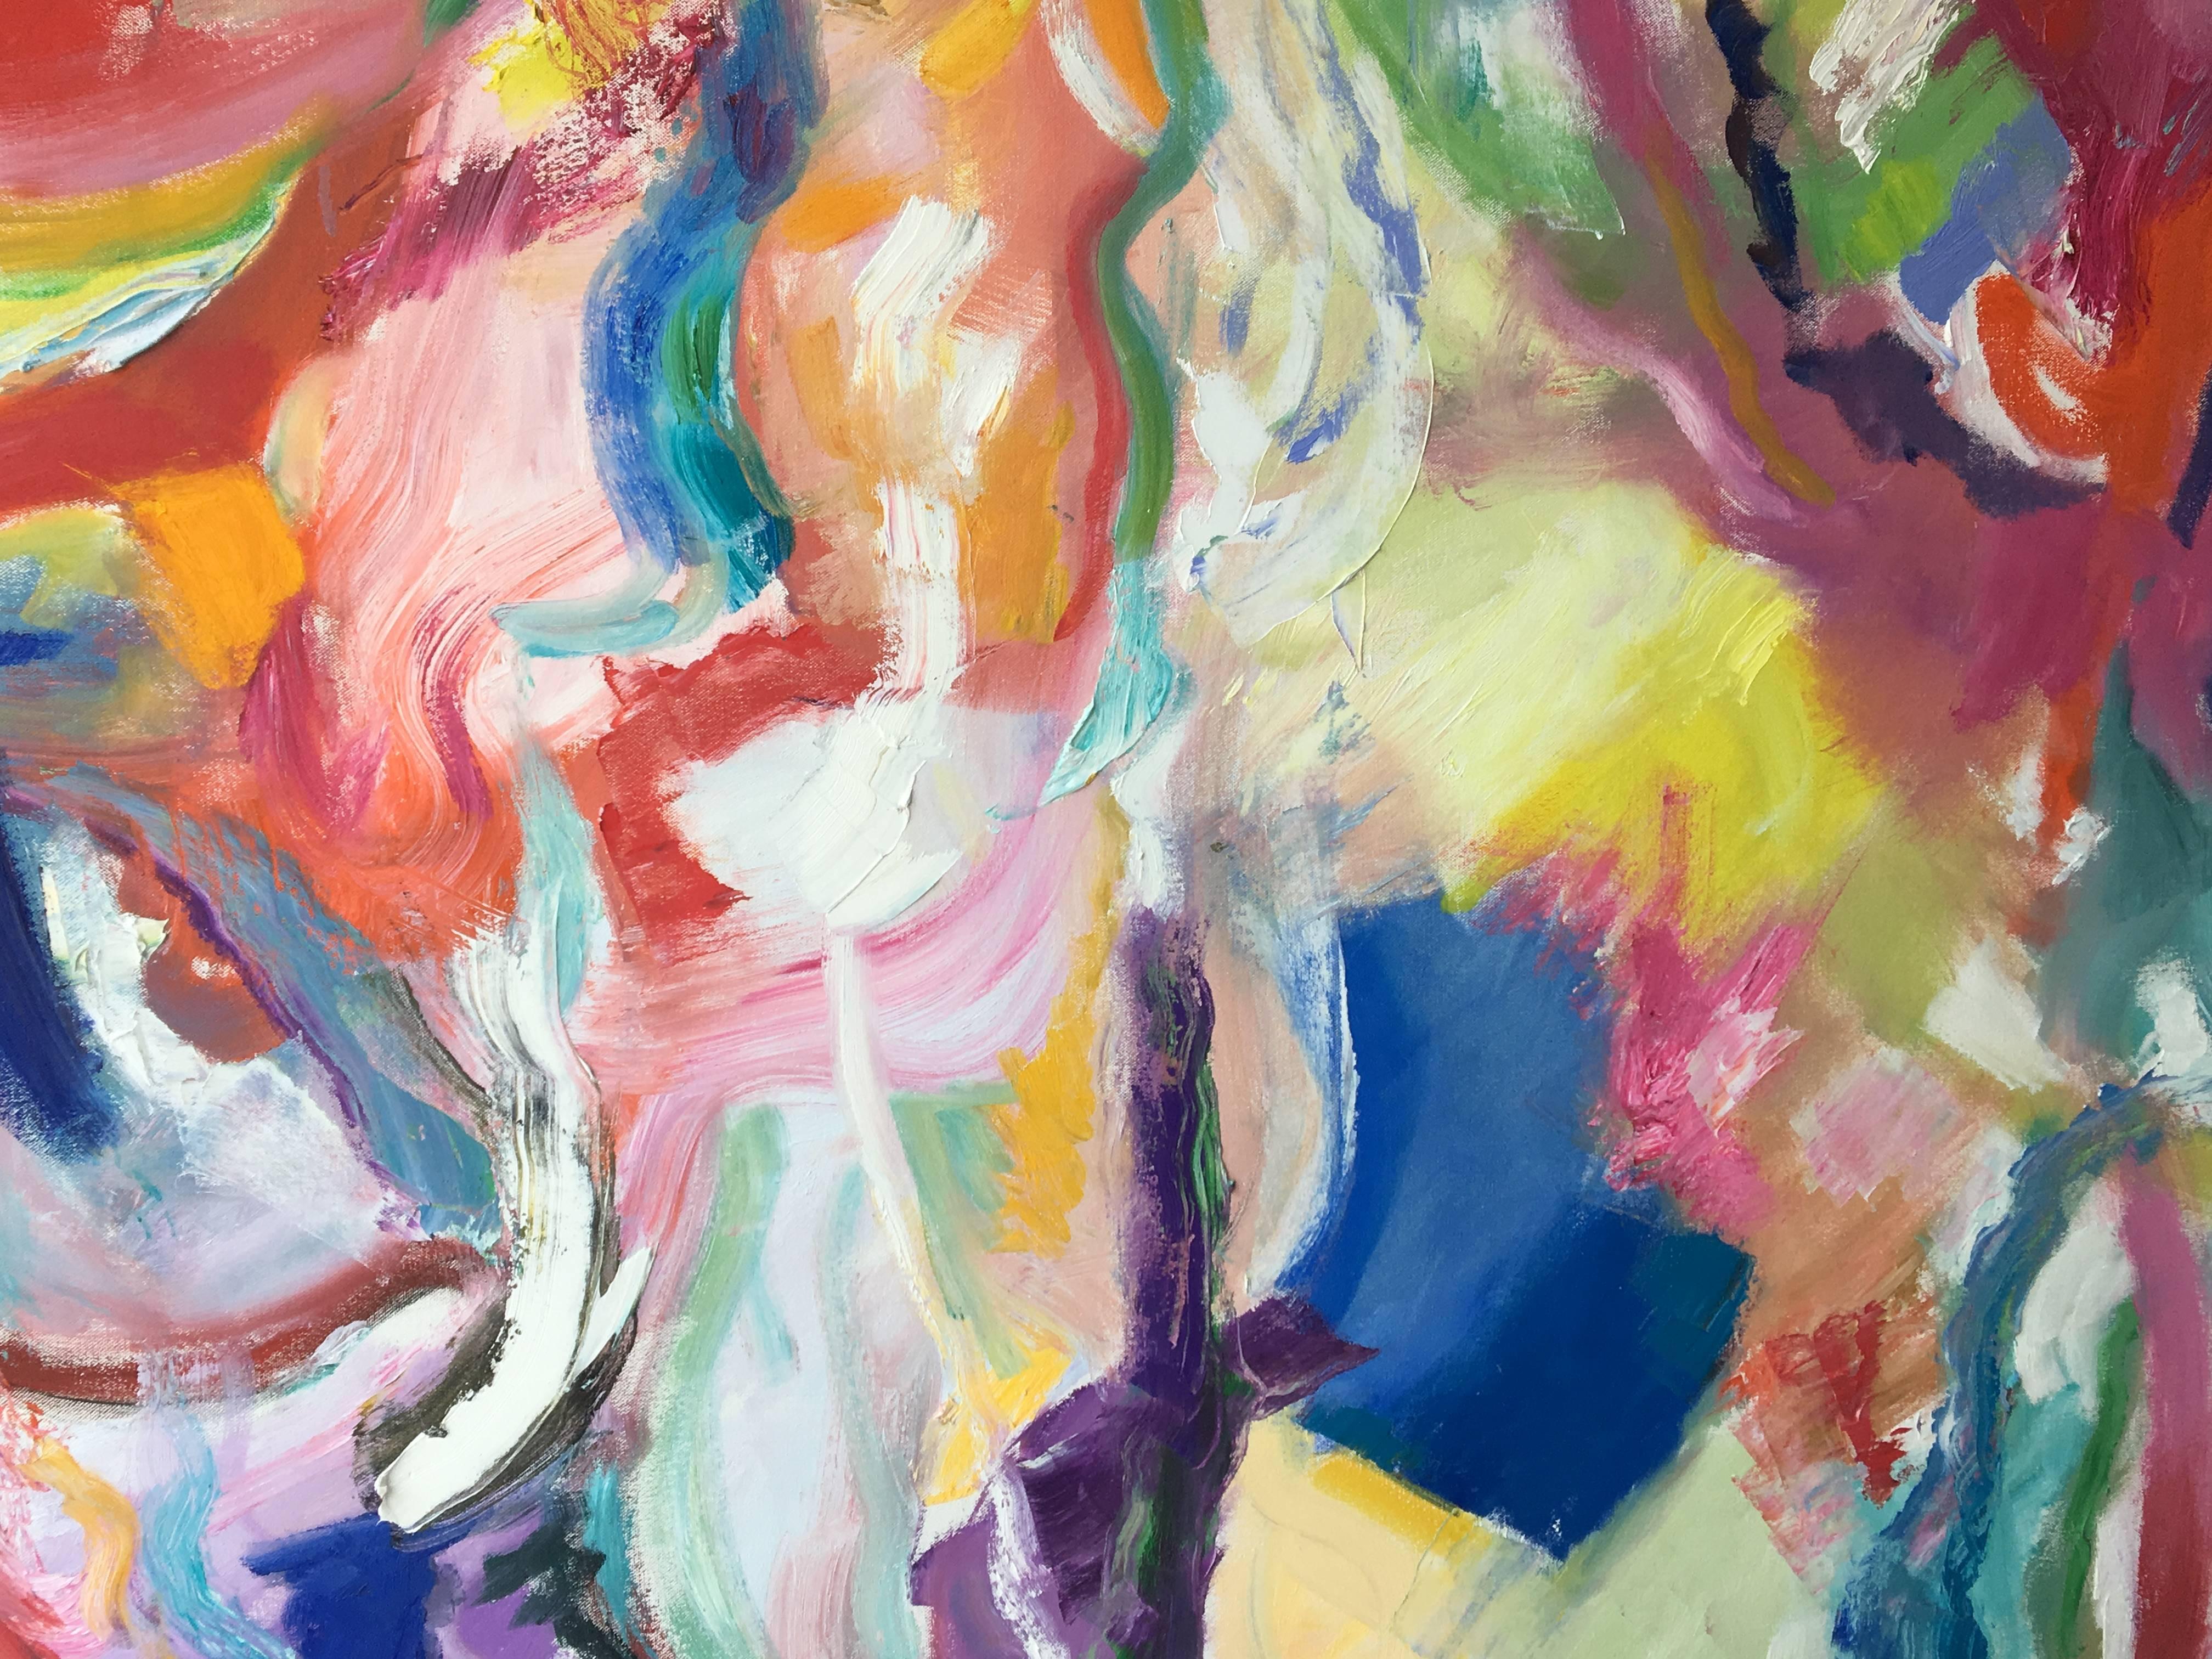 This large-scale oil on canvas (48x48) by Ben Georgia is a wonderful example of abstract expressionism.  

Ben's art has evolved from his studies with Theodore Stamos in the 1970s to a more idiosyncratic use of abstract form, color and light. His